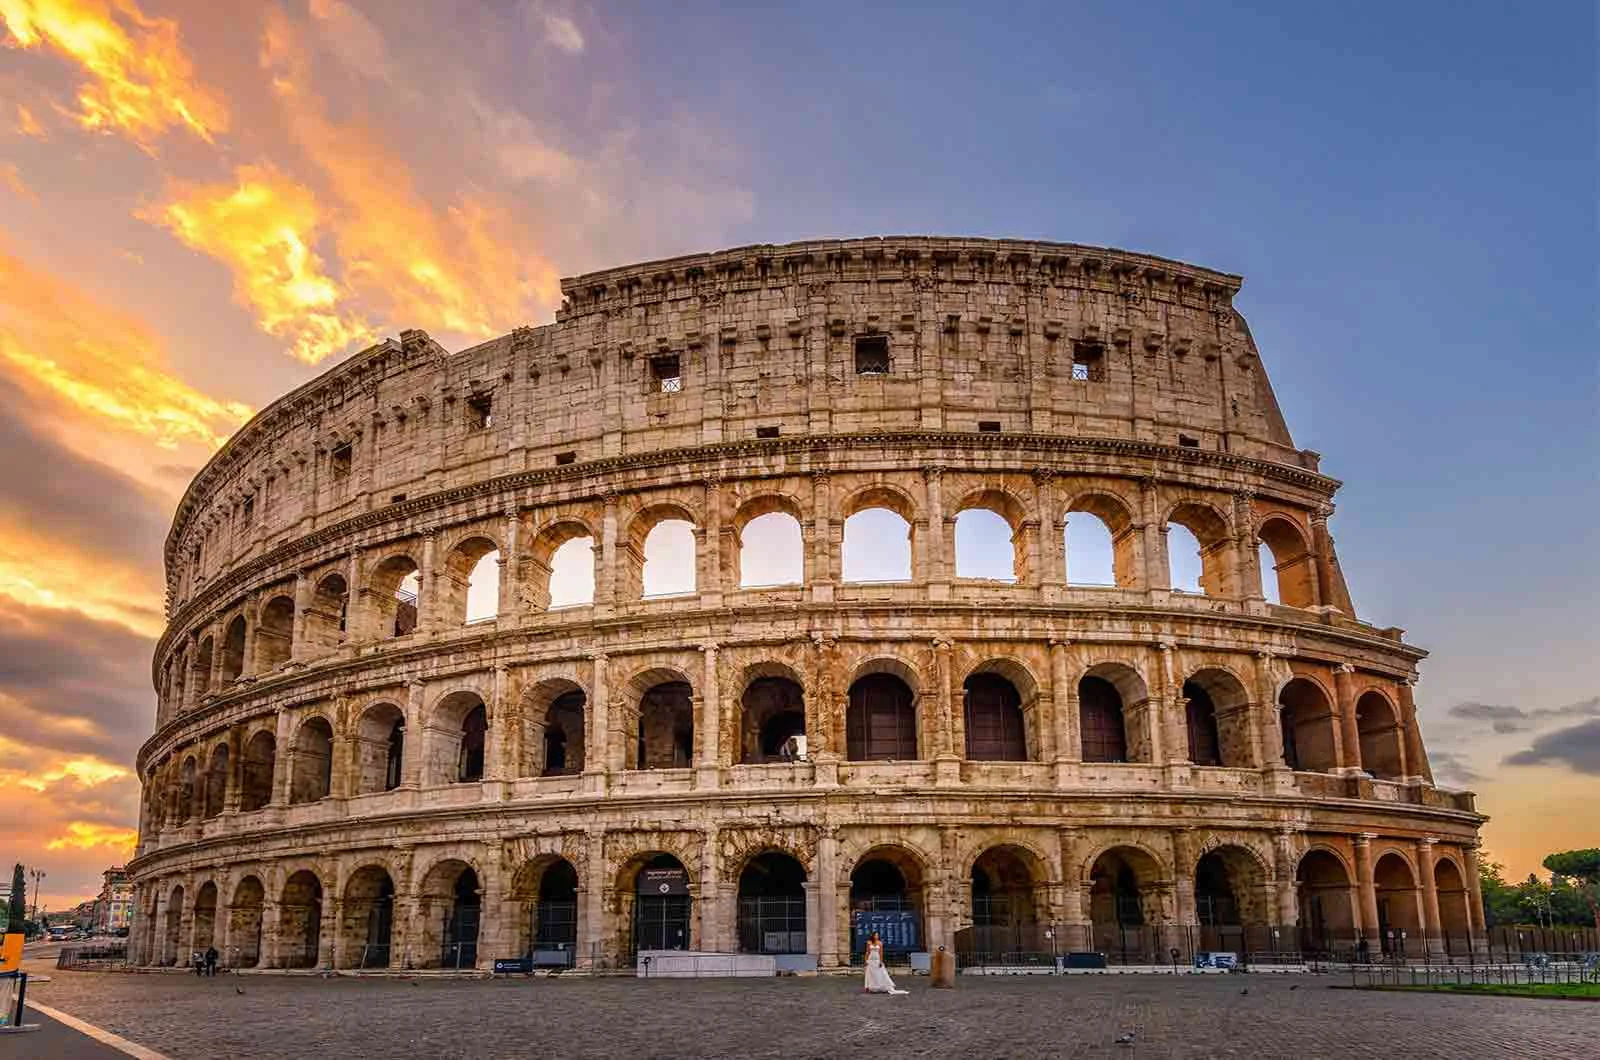 Sunrise behind the Colosseum in Rome, showing the beauty of ancient architecture. Concept of Italian translations.